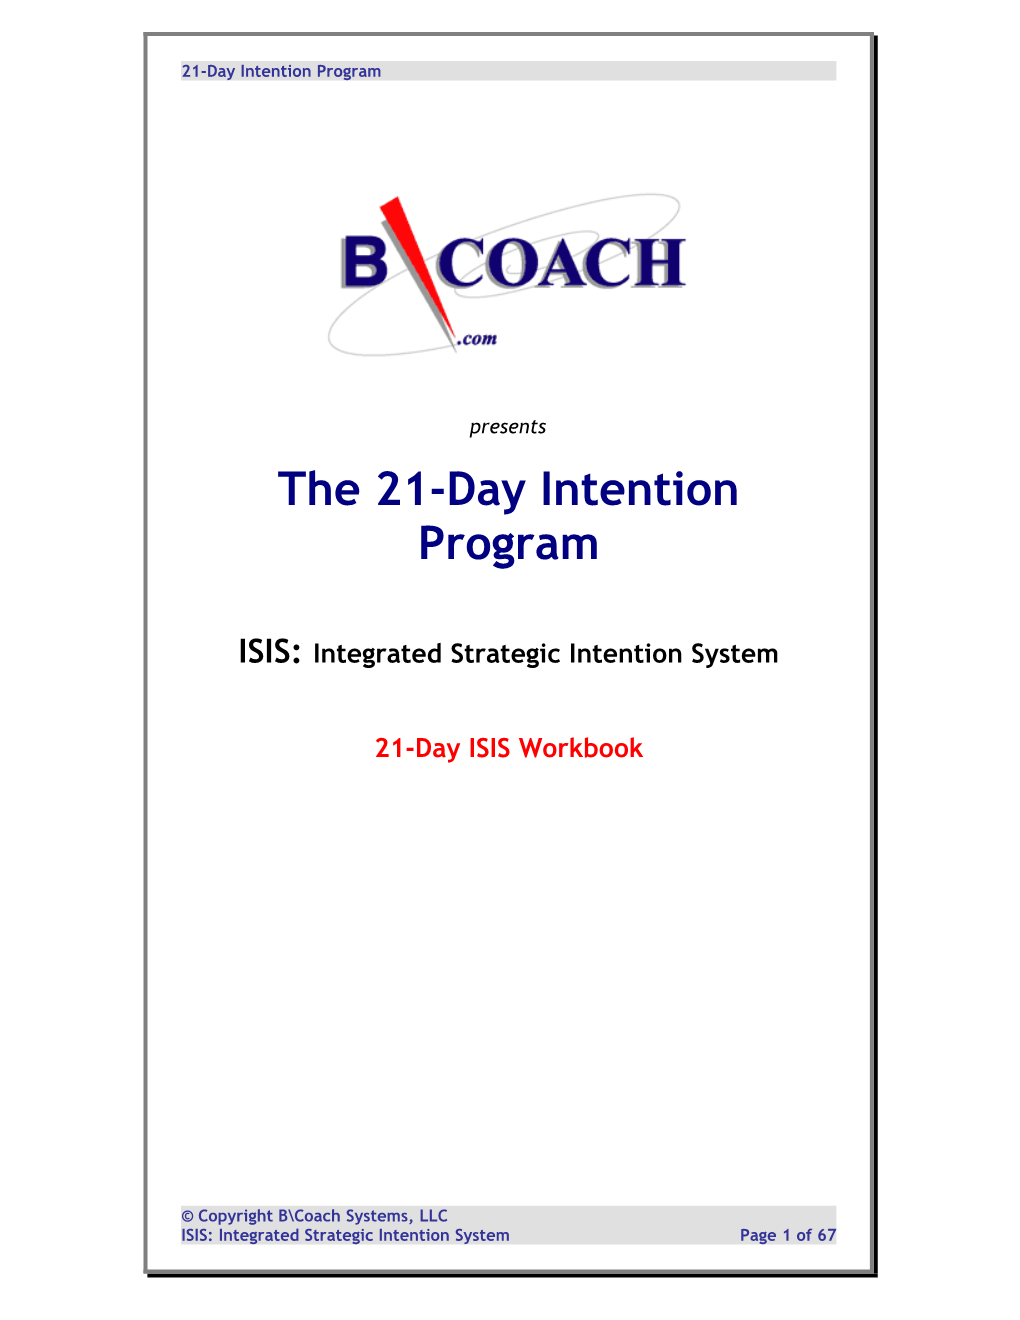 The 21-Day Intention Program